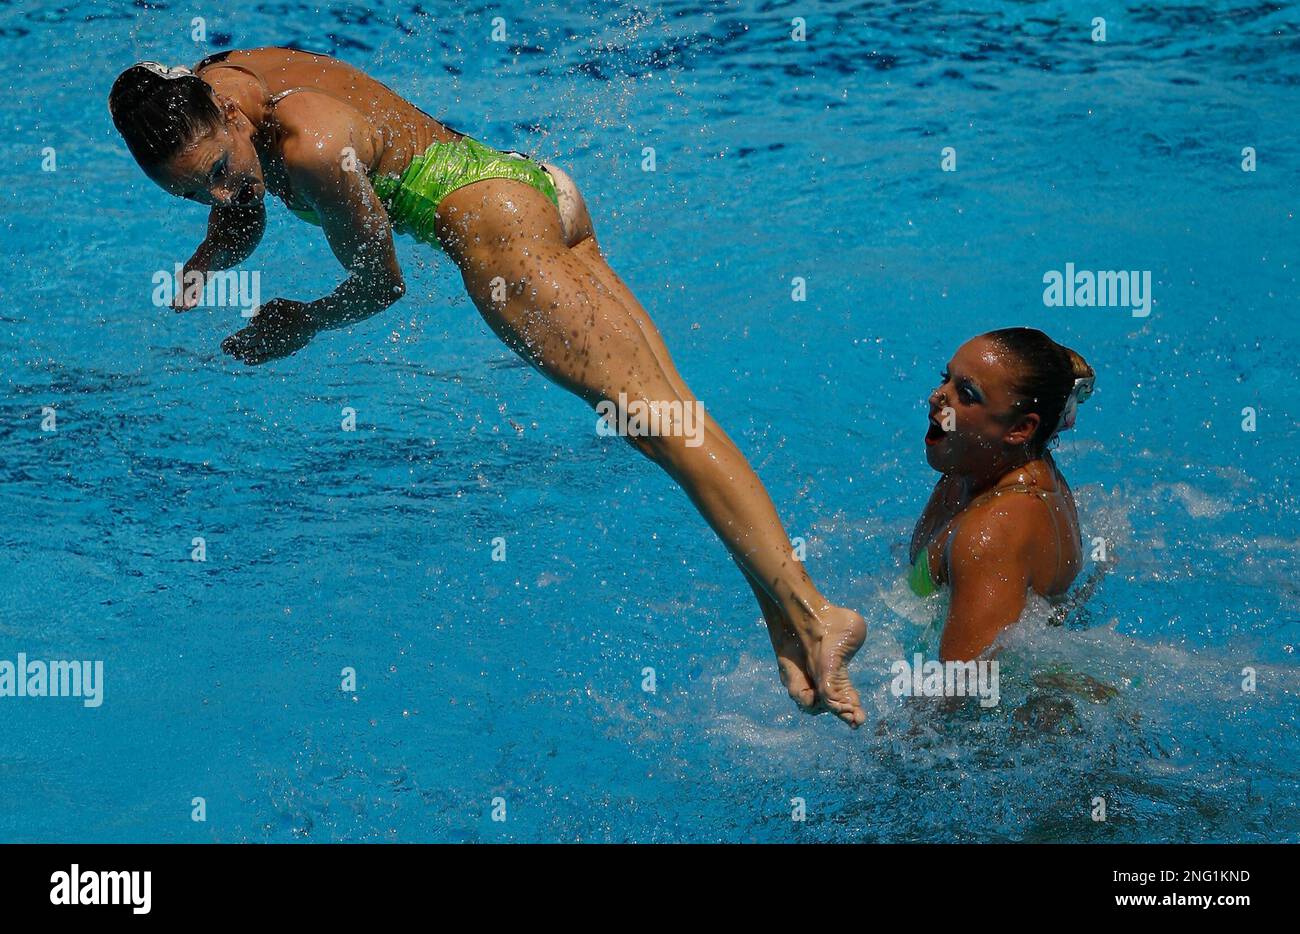 USAs synchronized swimming team performs during the FINA 2nd Synchro World Trophy in Rio de Janeiro, Saturday, Oct. 13, 2007